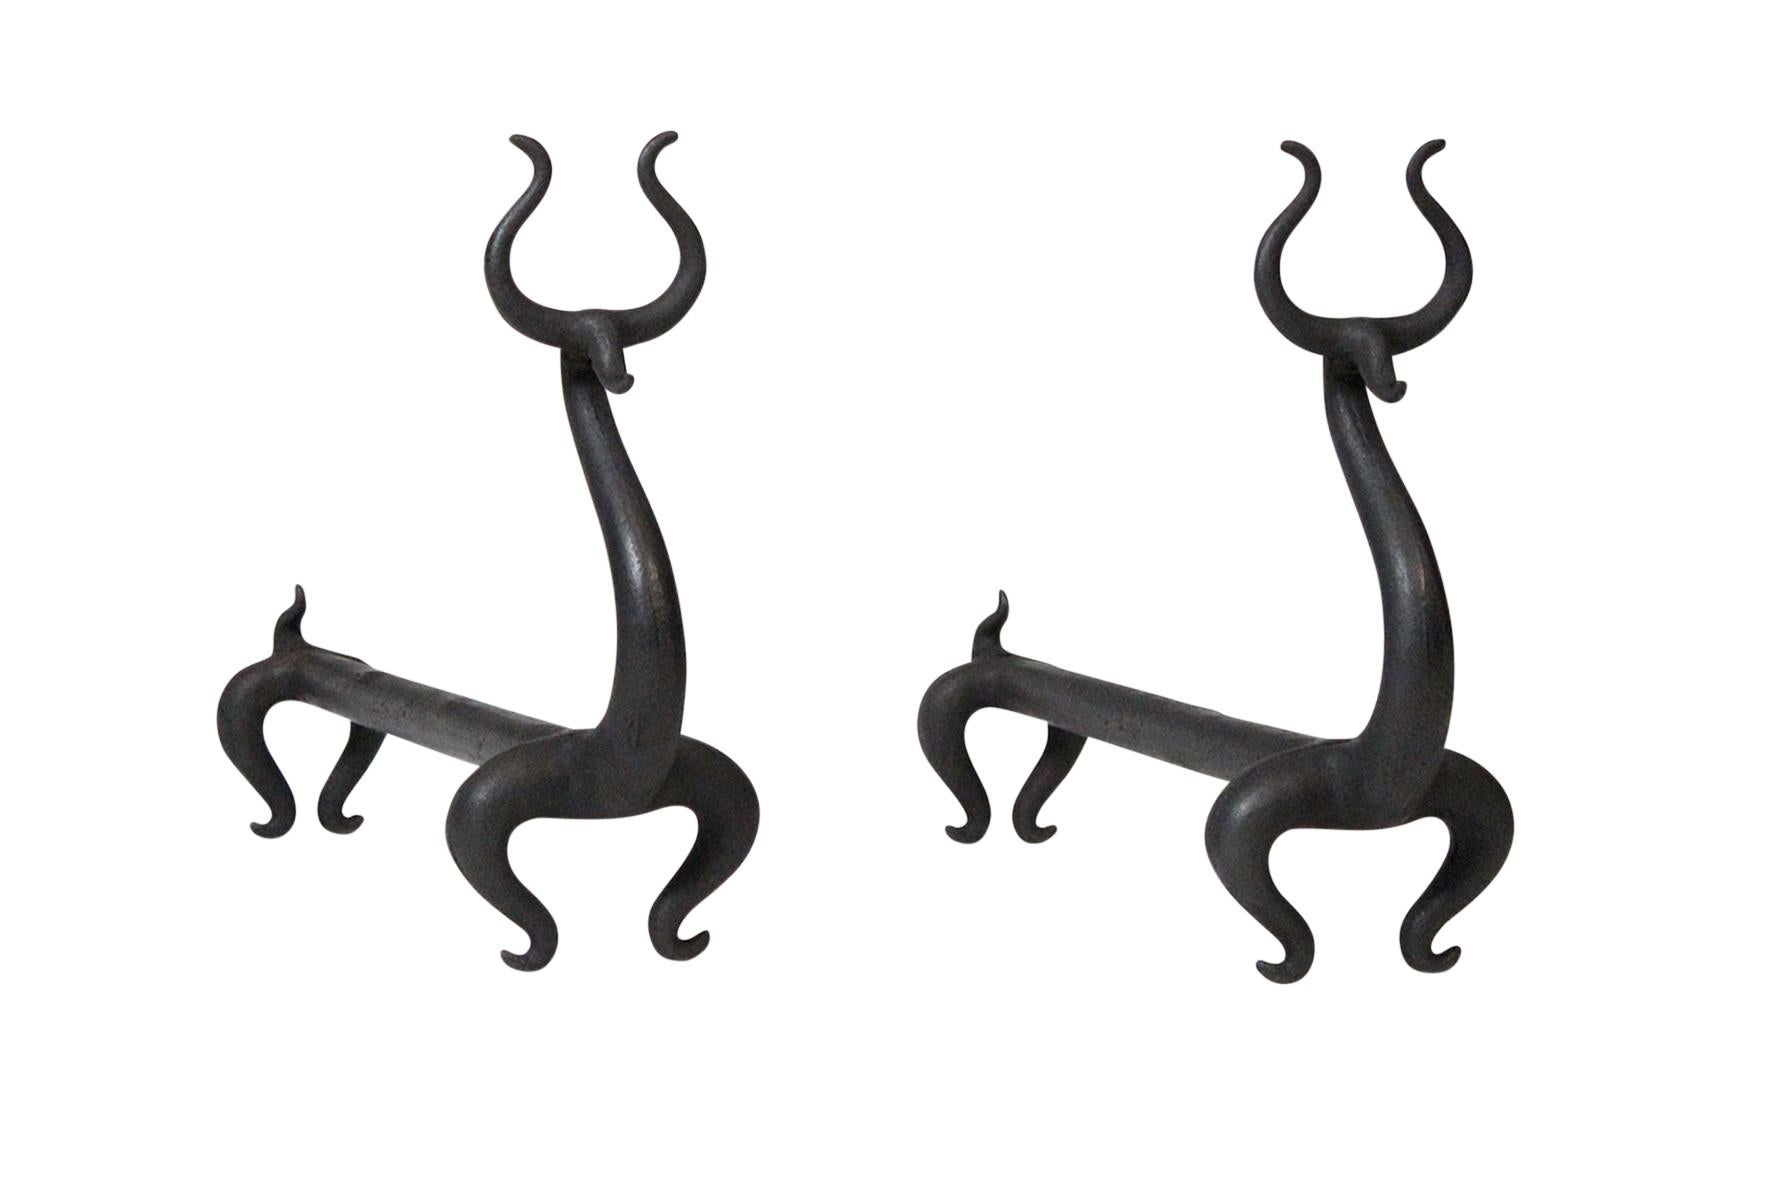 Extremely rare pair of handmade wrought iron 